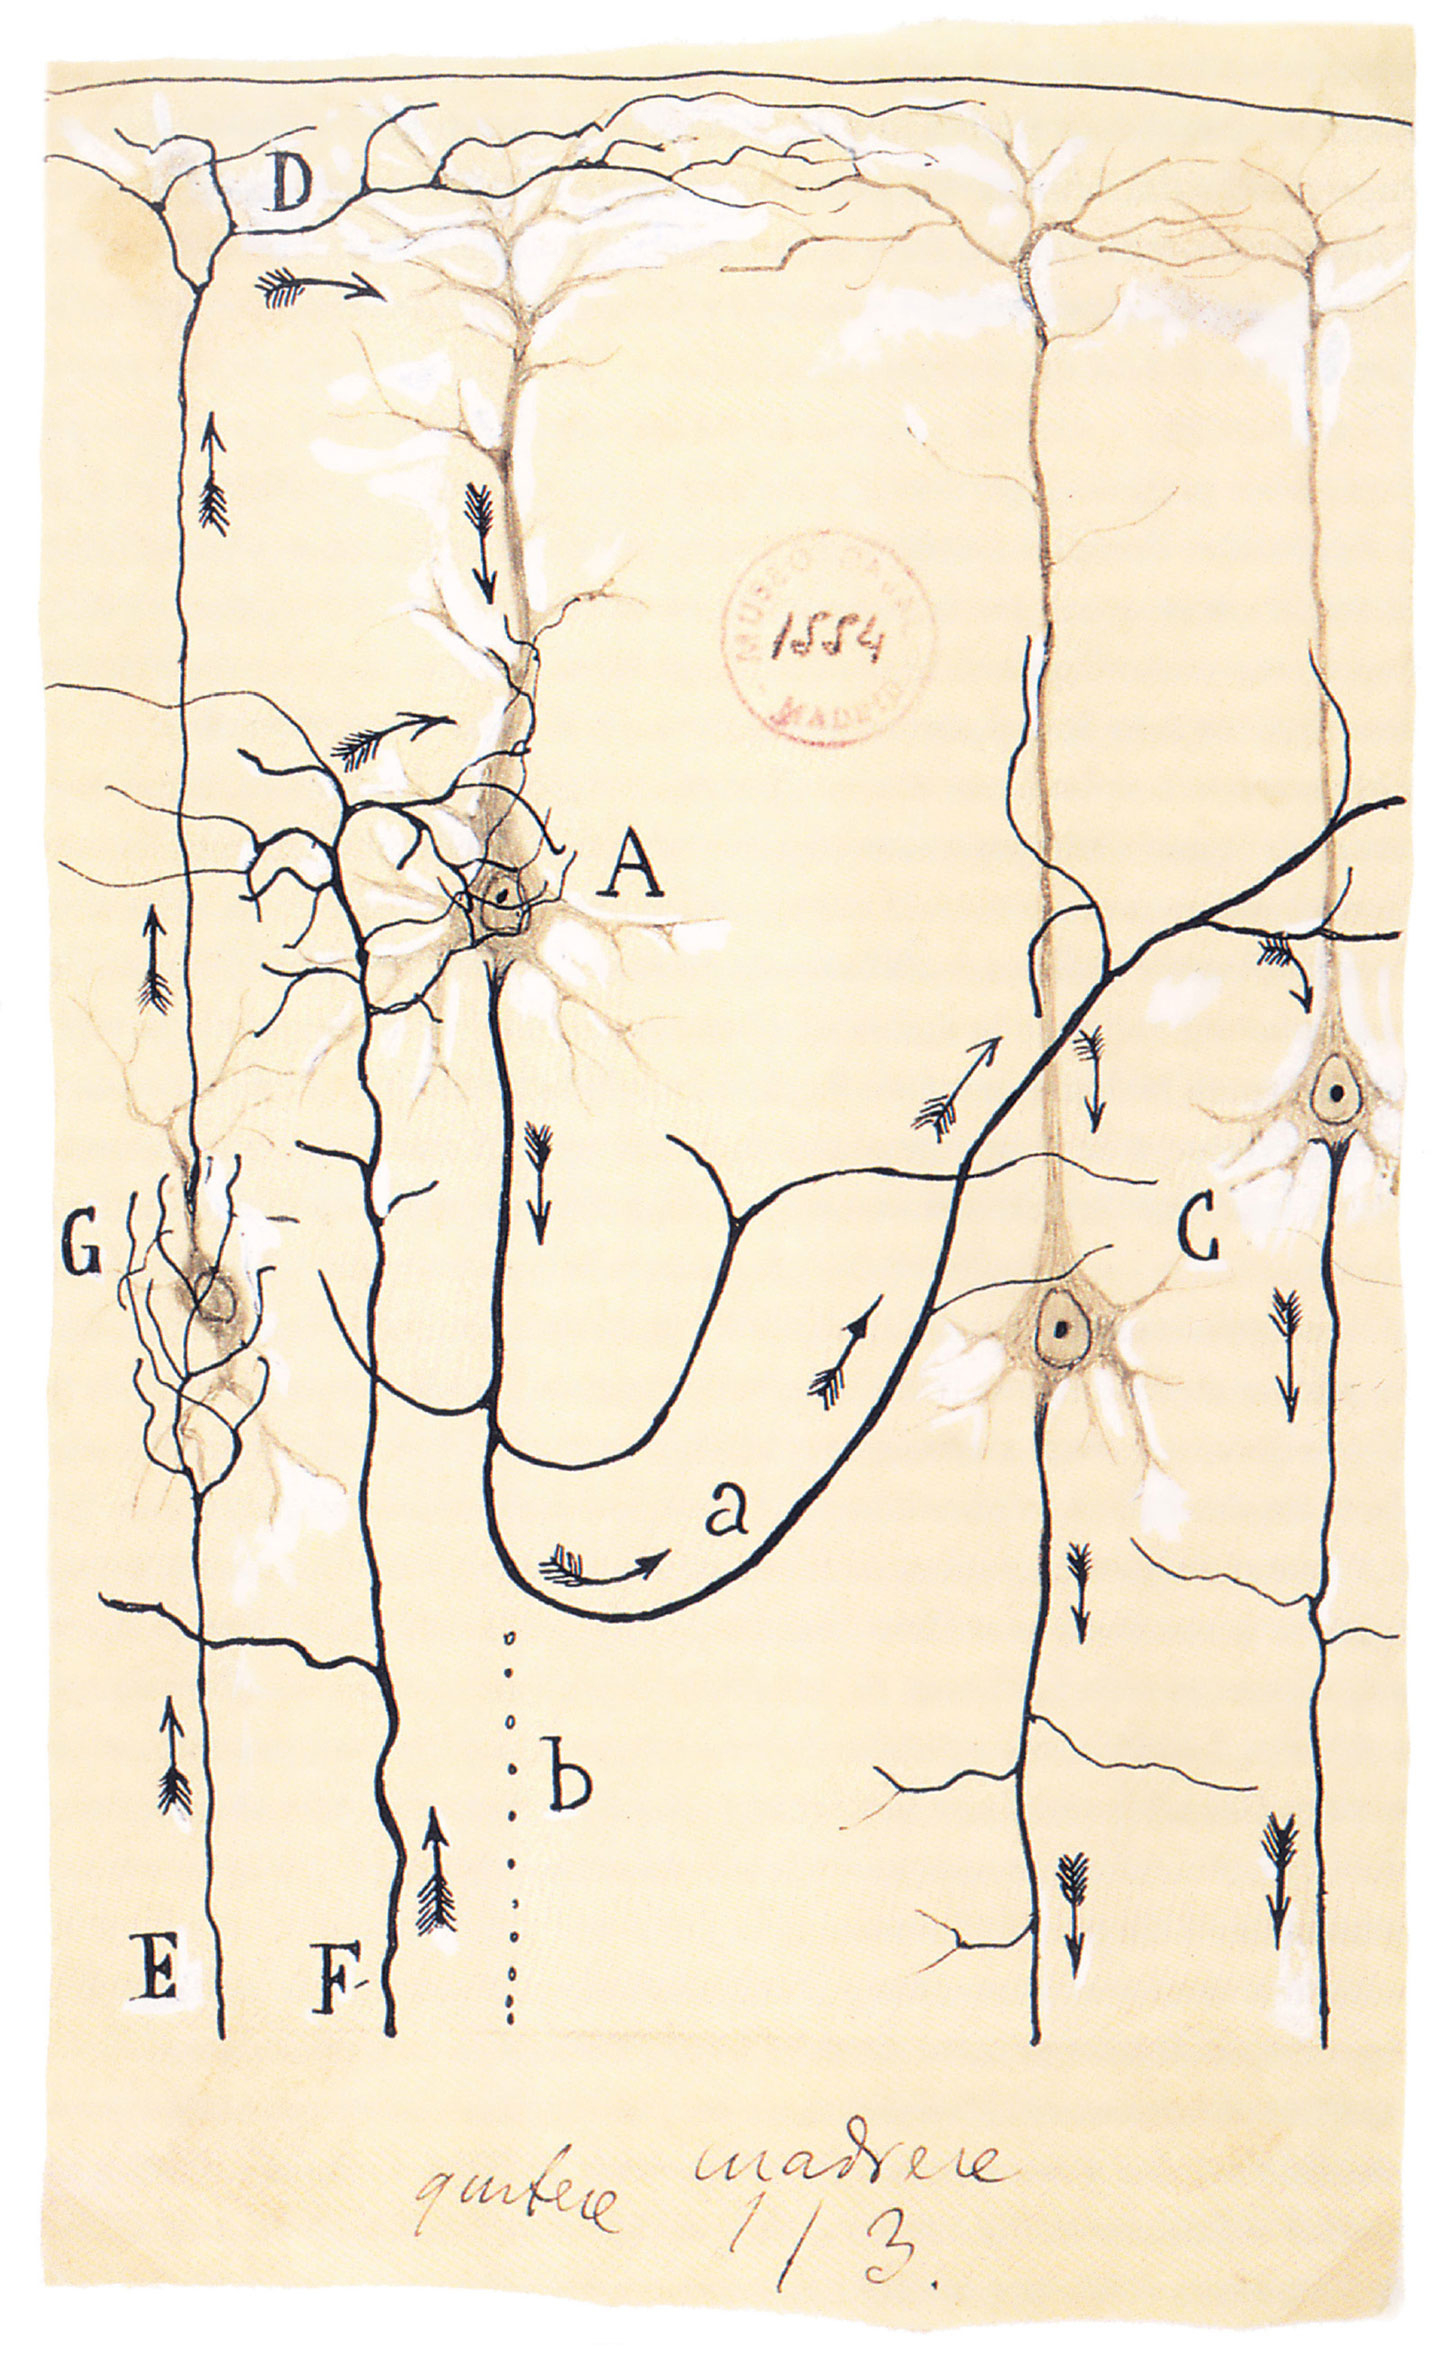 Illustration by Santiago Ramón y Cajal indicating the flow of currents in the brain. The Spanish neuroscientist’s pioneering investigations of neural structures earned him the Nobel Prize in 1906.